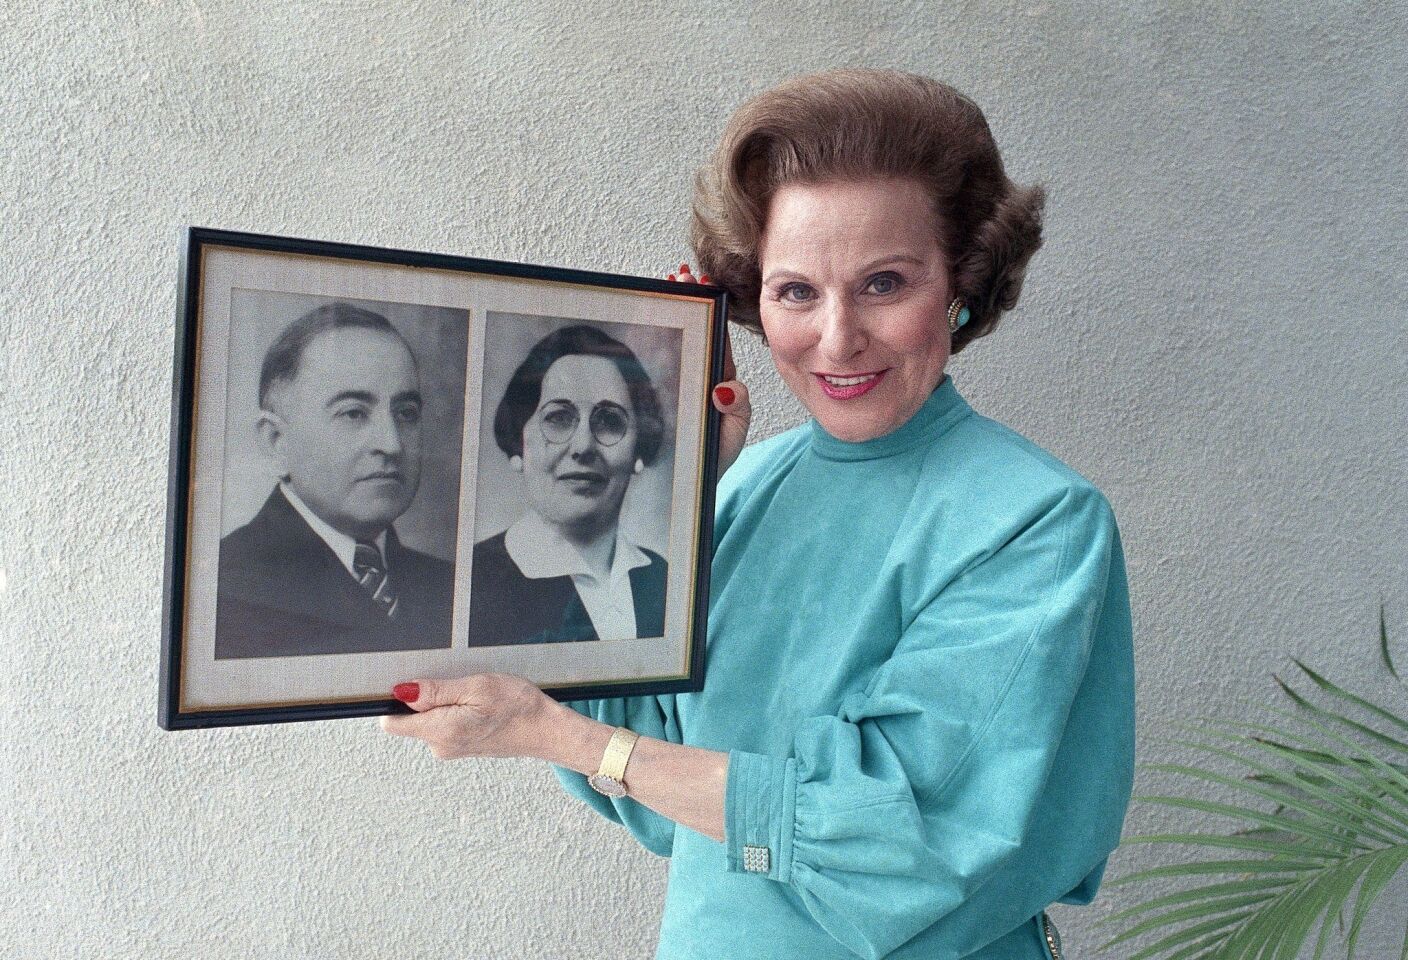 Pauline Friedman Phillips -- also known as Abigail Van Buren, the first writer of the "Dear Abby" column -- holds a photograph showing her mother and father.